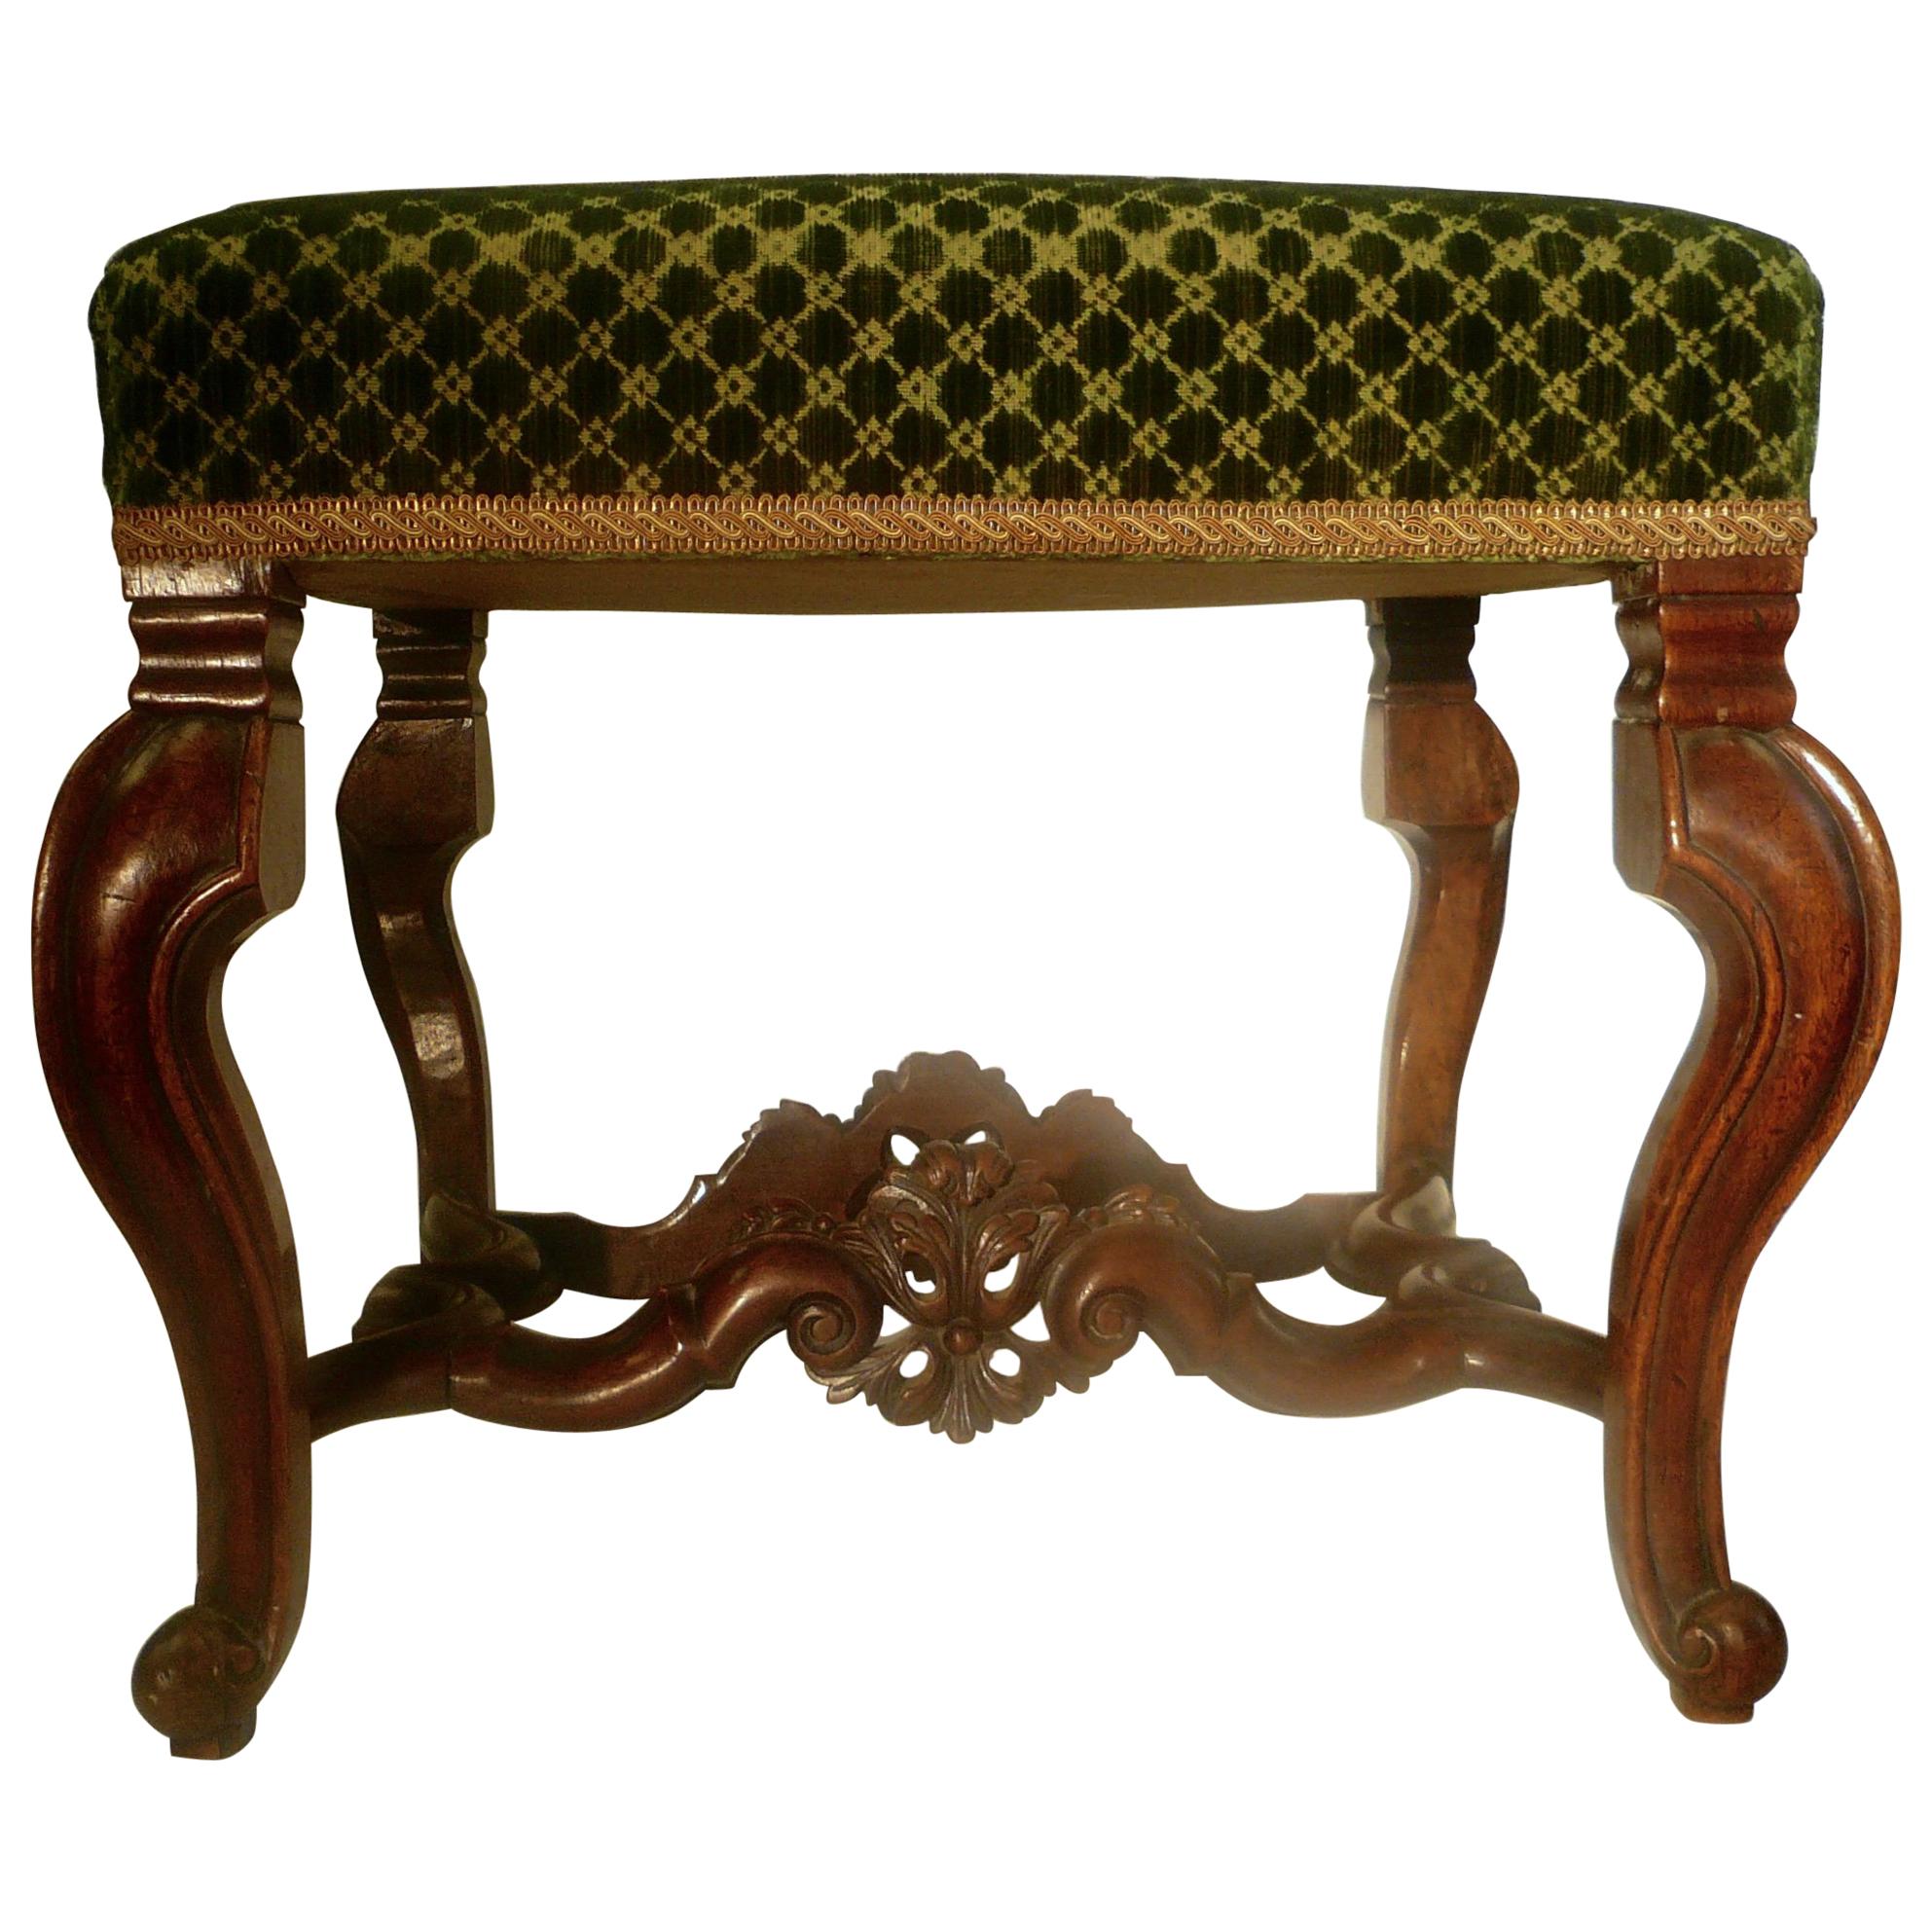 Pair of English Baroque Carved Walnut, William and Mary Upholstered Benches